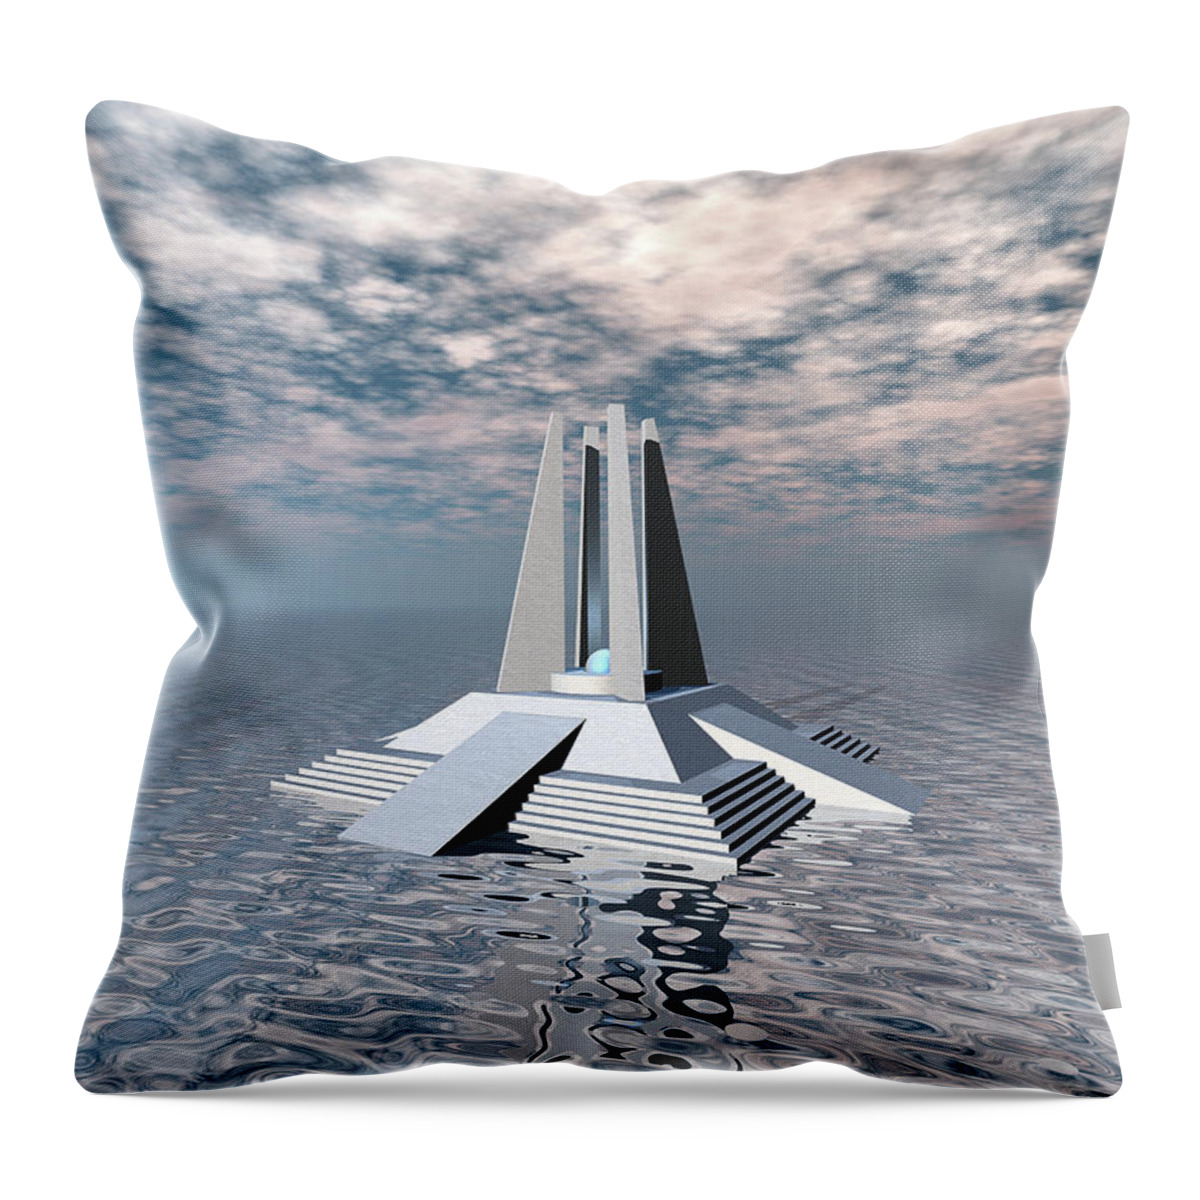 Atlantis Throw Pillow featuring the digital art Structural Tower of Atlantis by Phil Perkins